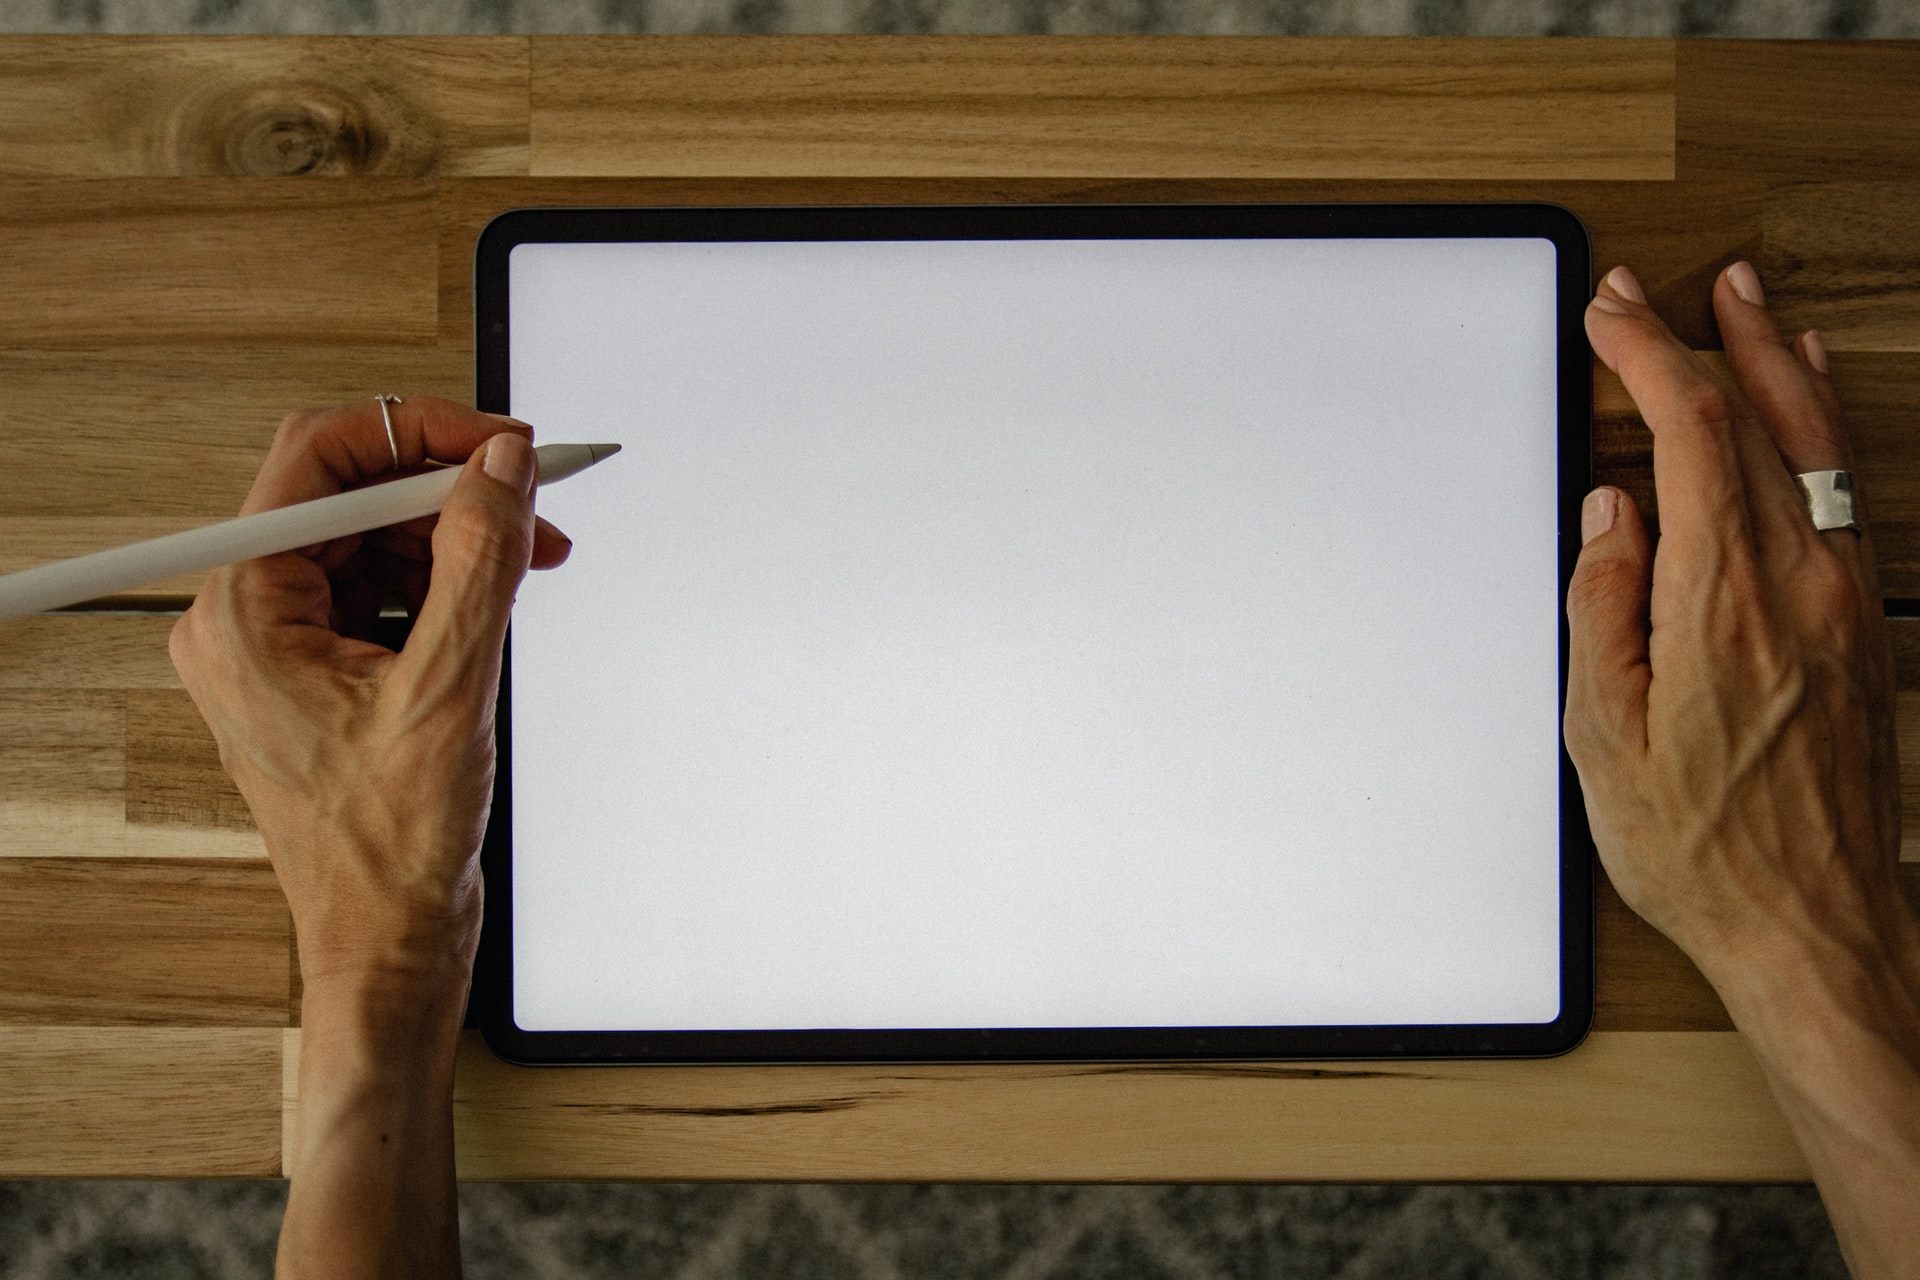 App to Make Amazing Drawings on a Tablet - Learn to Download